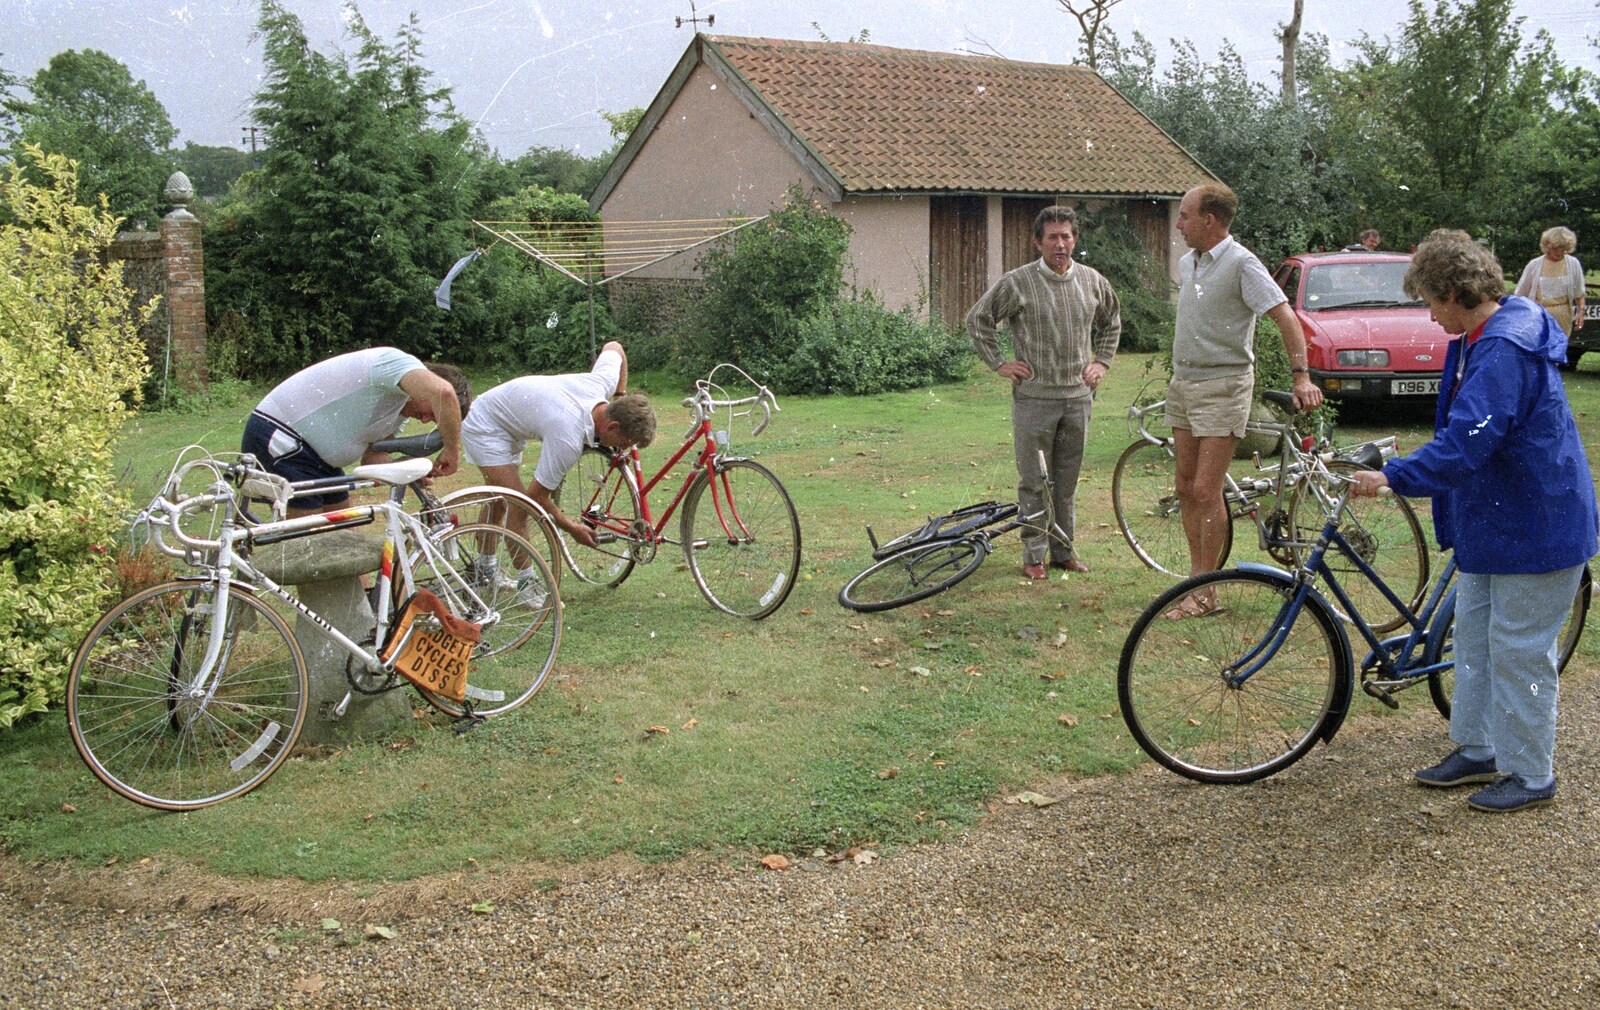 Bikes are prepared from A Bike Ride to Redgrave, Suffolk - 11th August 1990